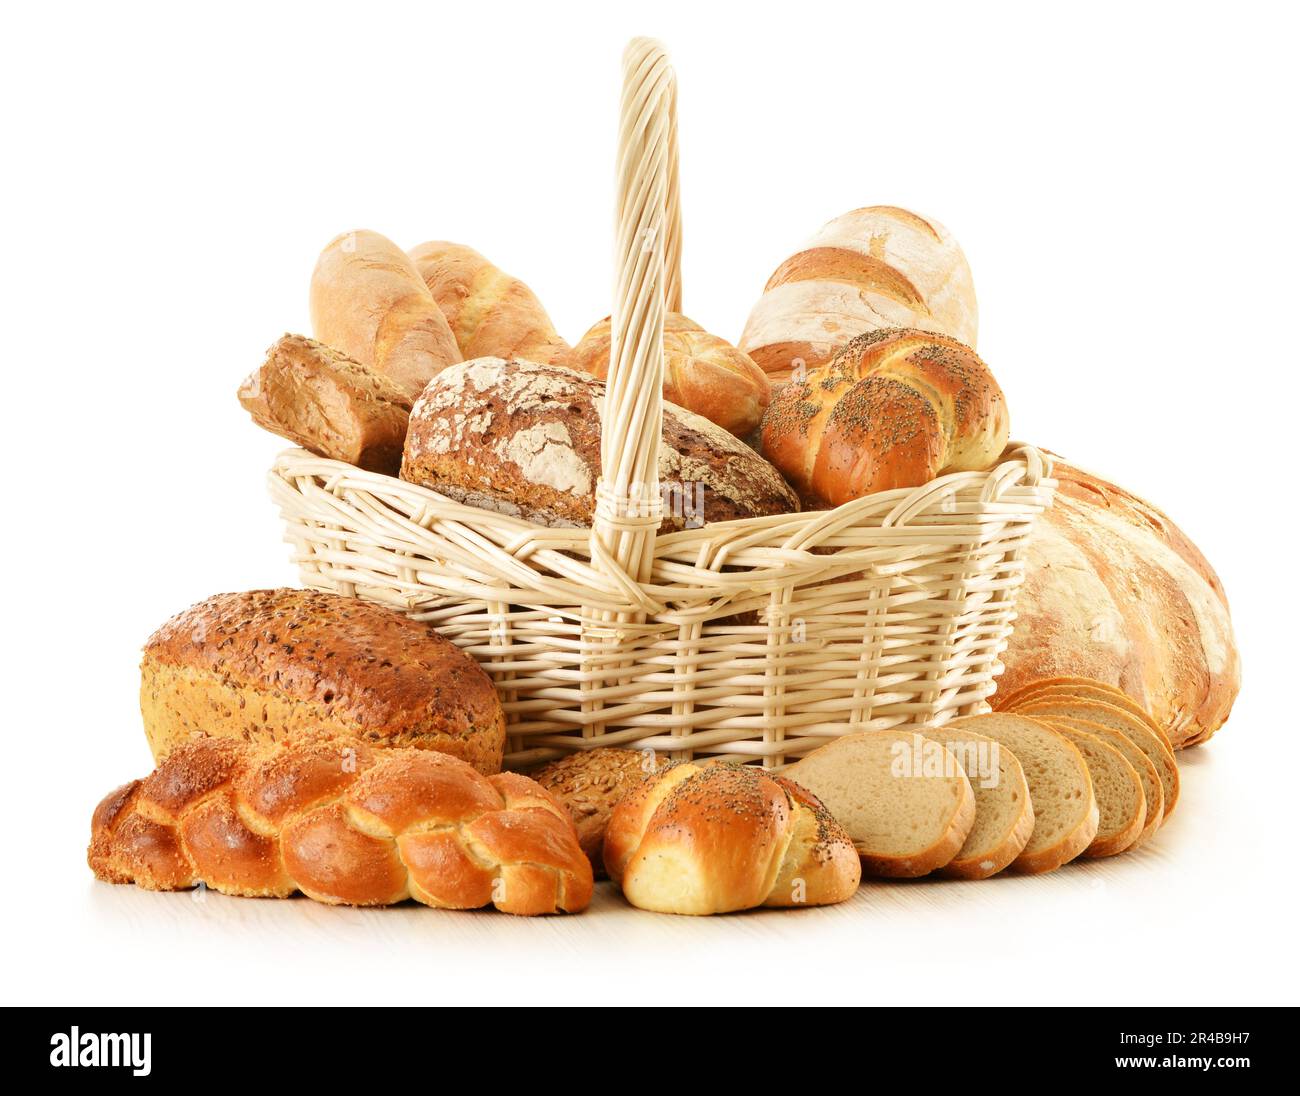 Composition with bread and rolls isolated on white Stock Photo